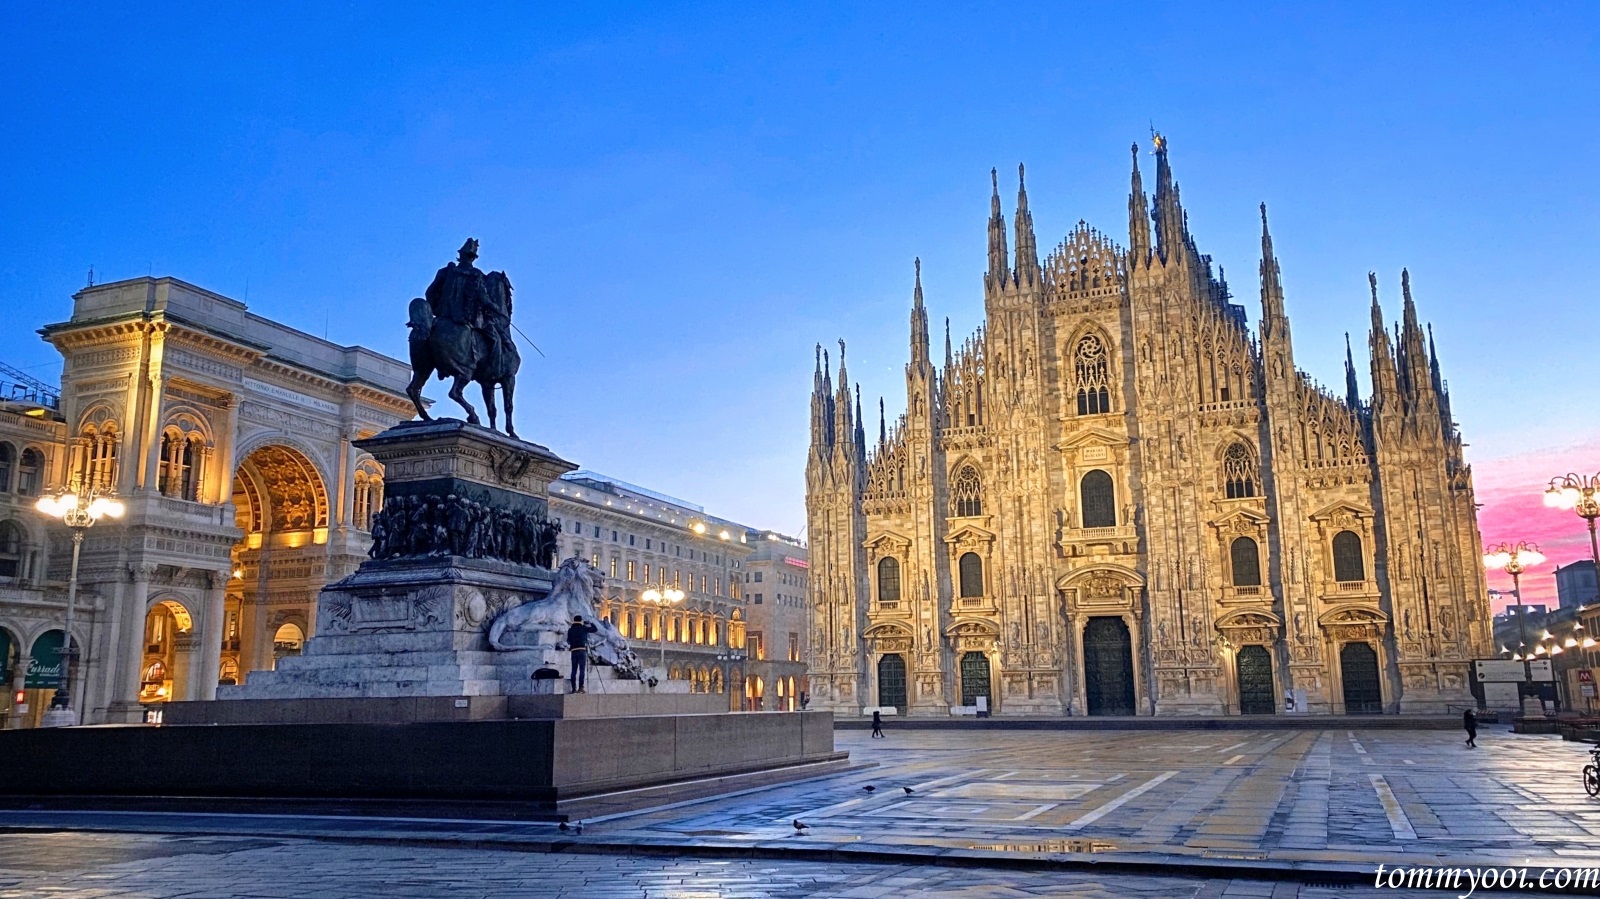 Milan - History, Culture, Fashion, Cuisine - Why Not Study in